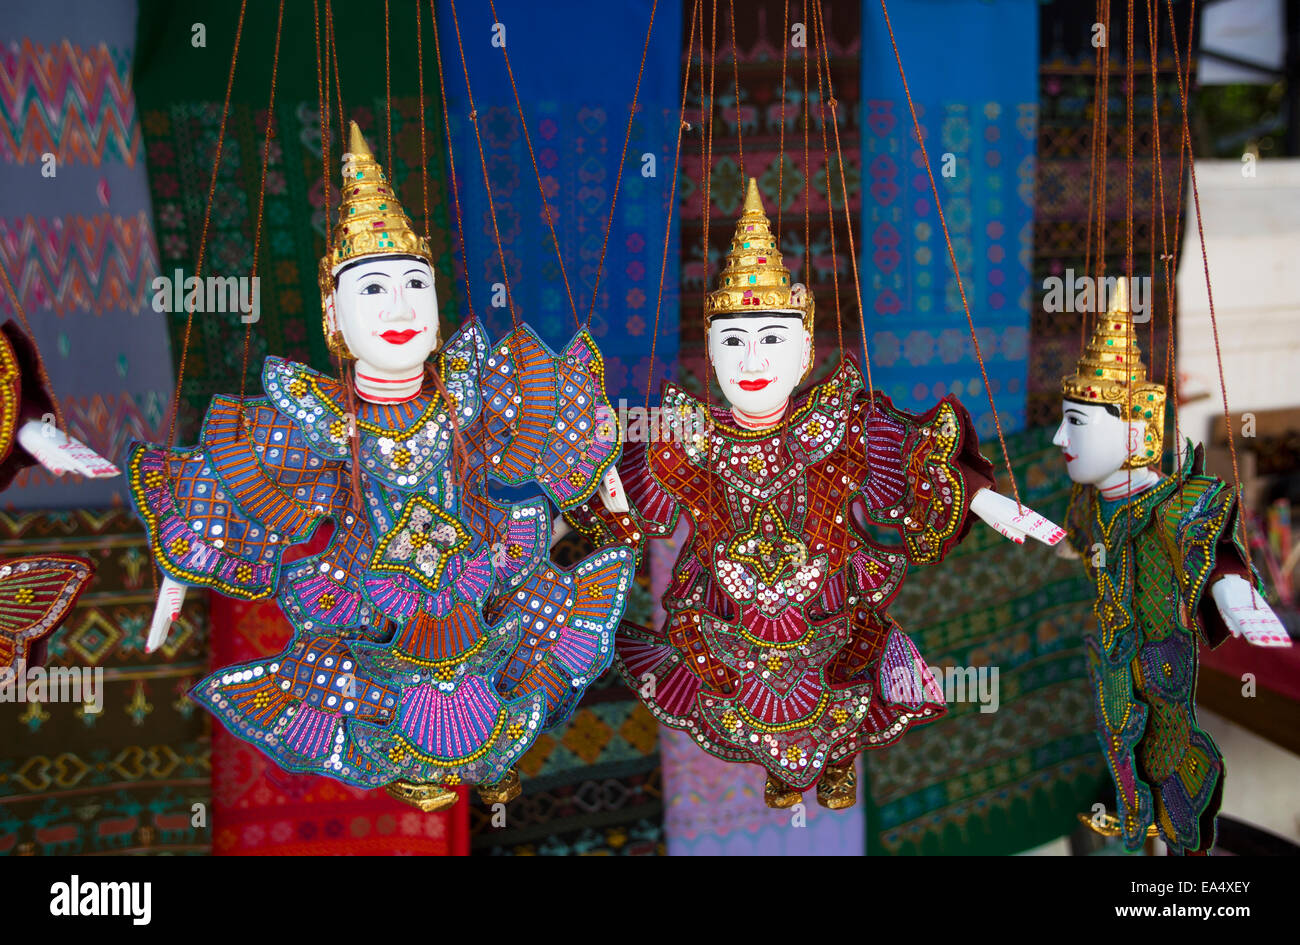 Puppets for sale in street market; Luang Prabang, Laos Stock Photo